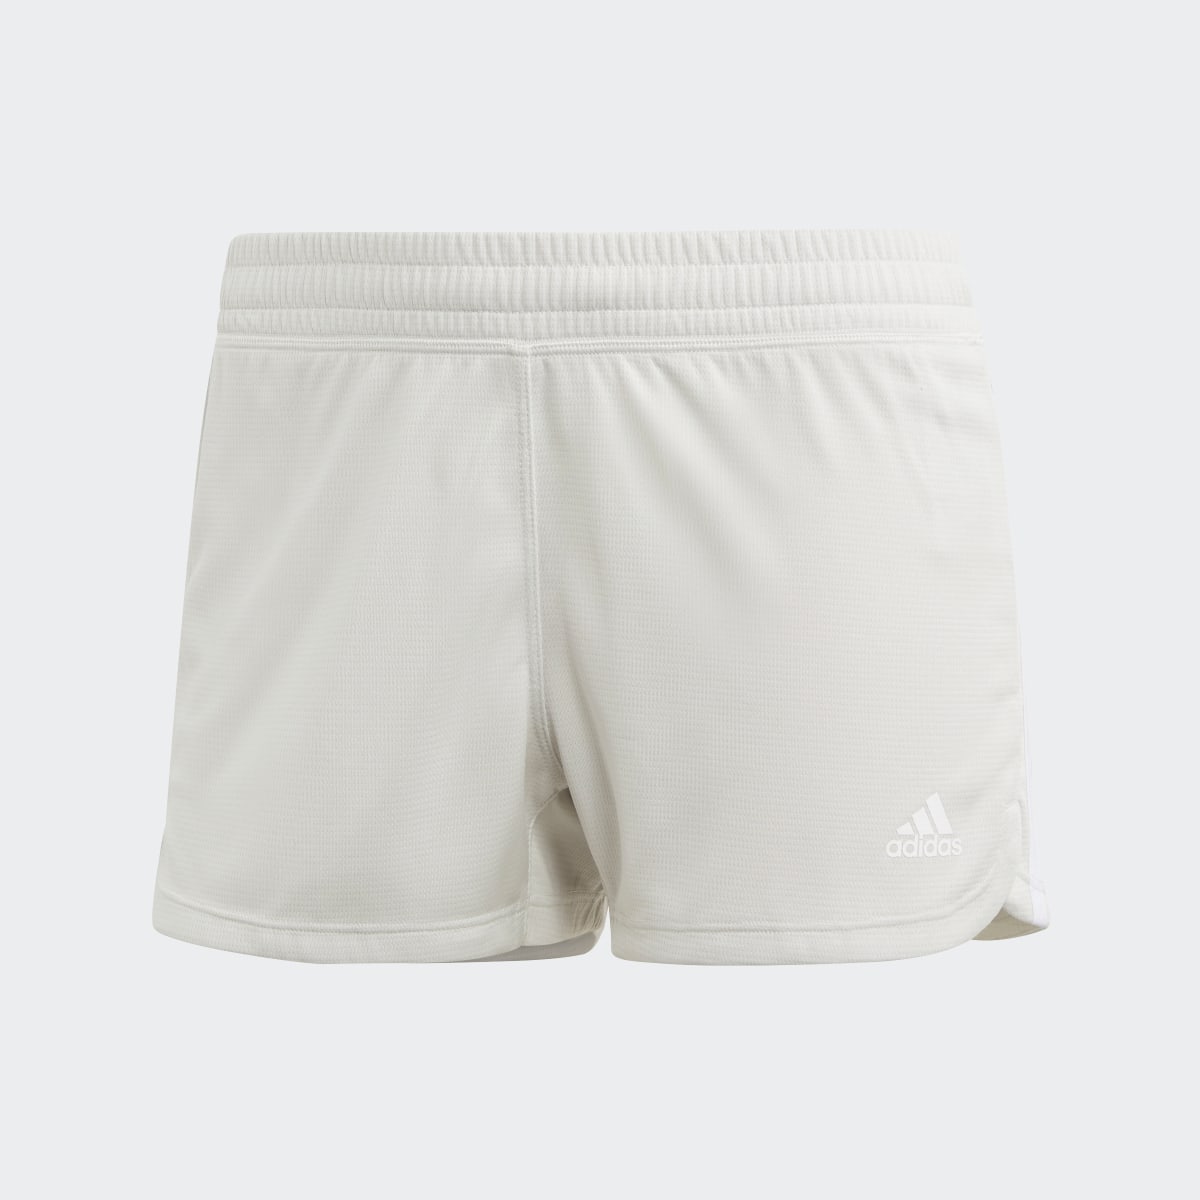 Adidas Short Pacer 3-Stripes Knit. 4